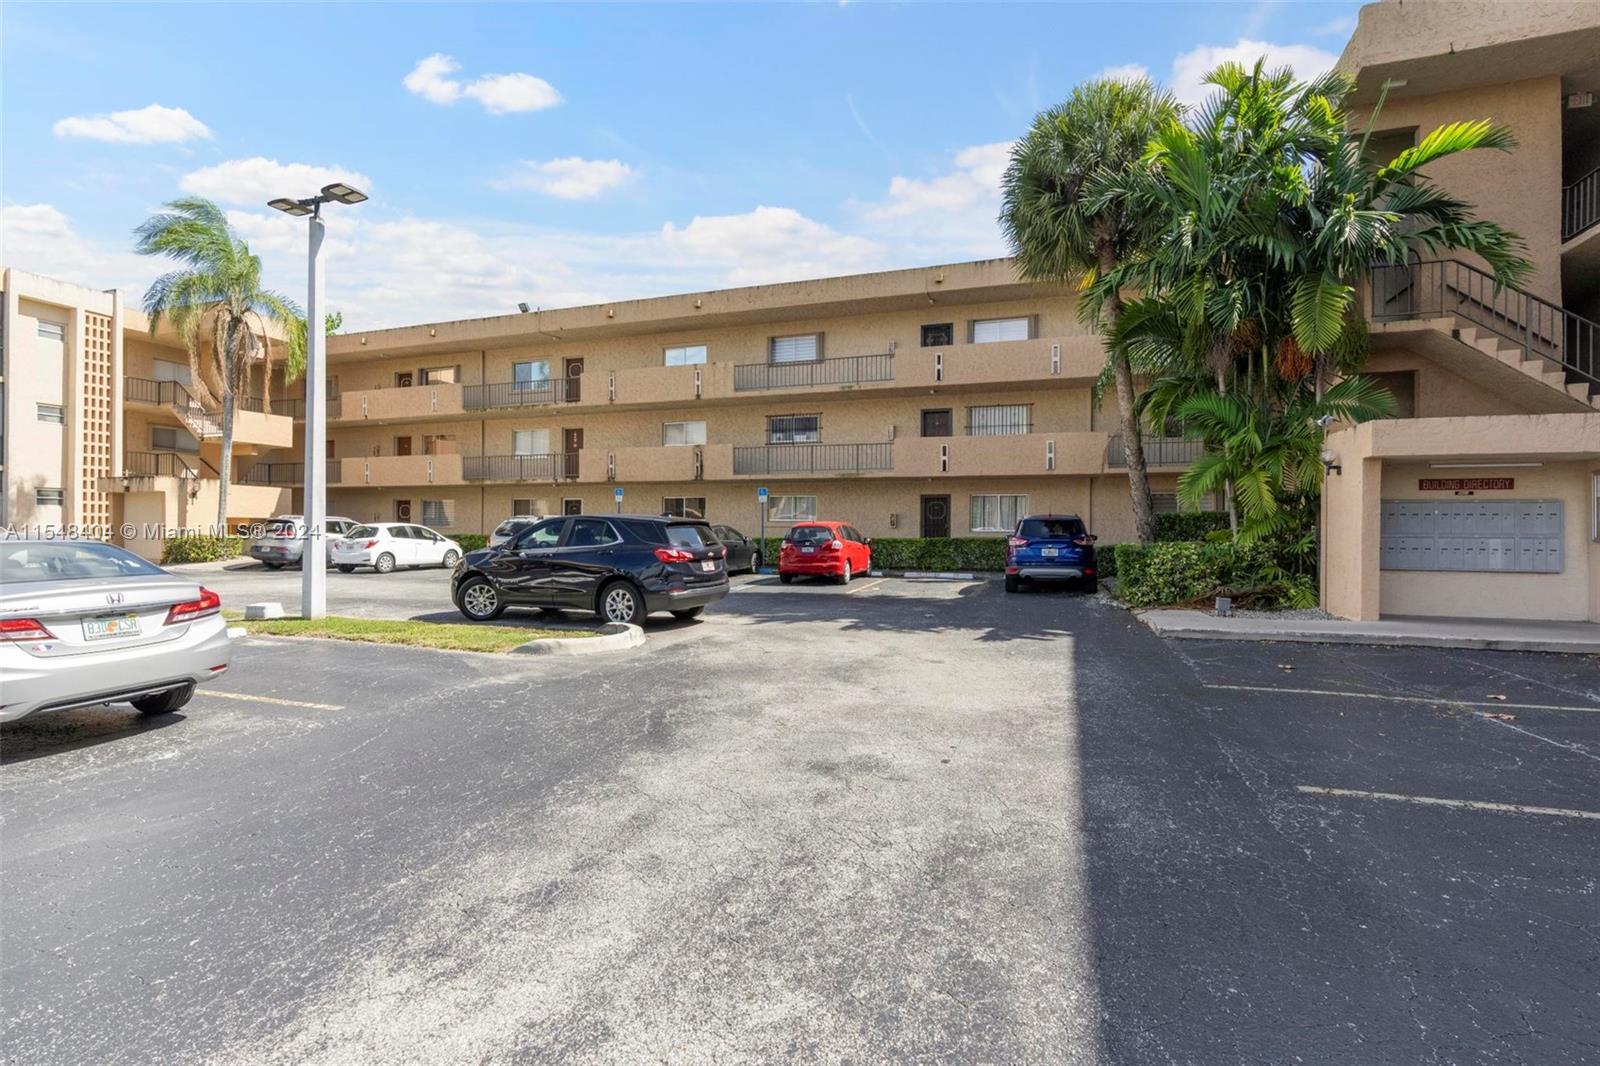 This spacious 2-bedroom, 2-bathroom condo in the desirable Kendall Acres West community is waiting f